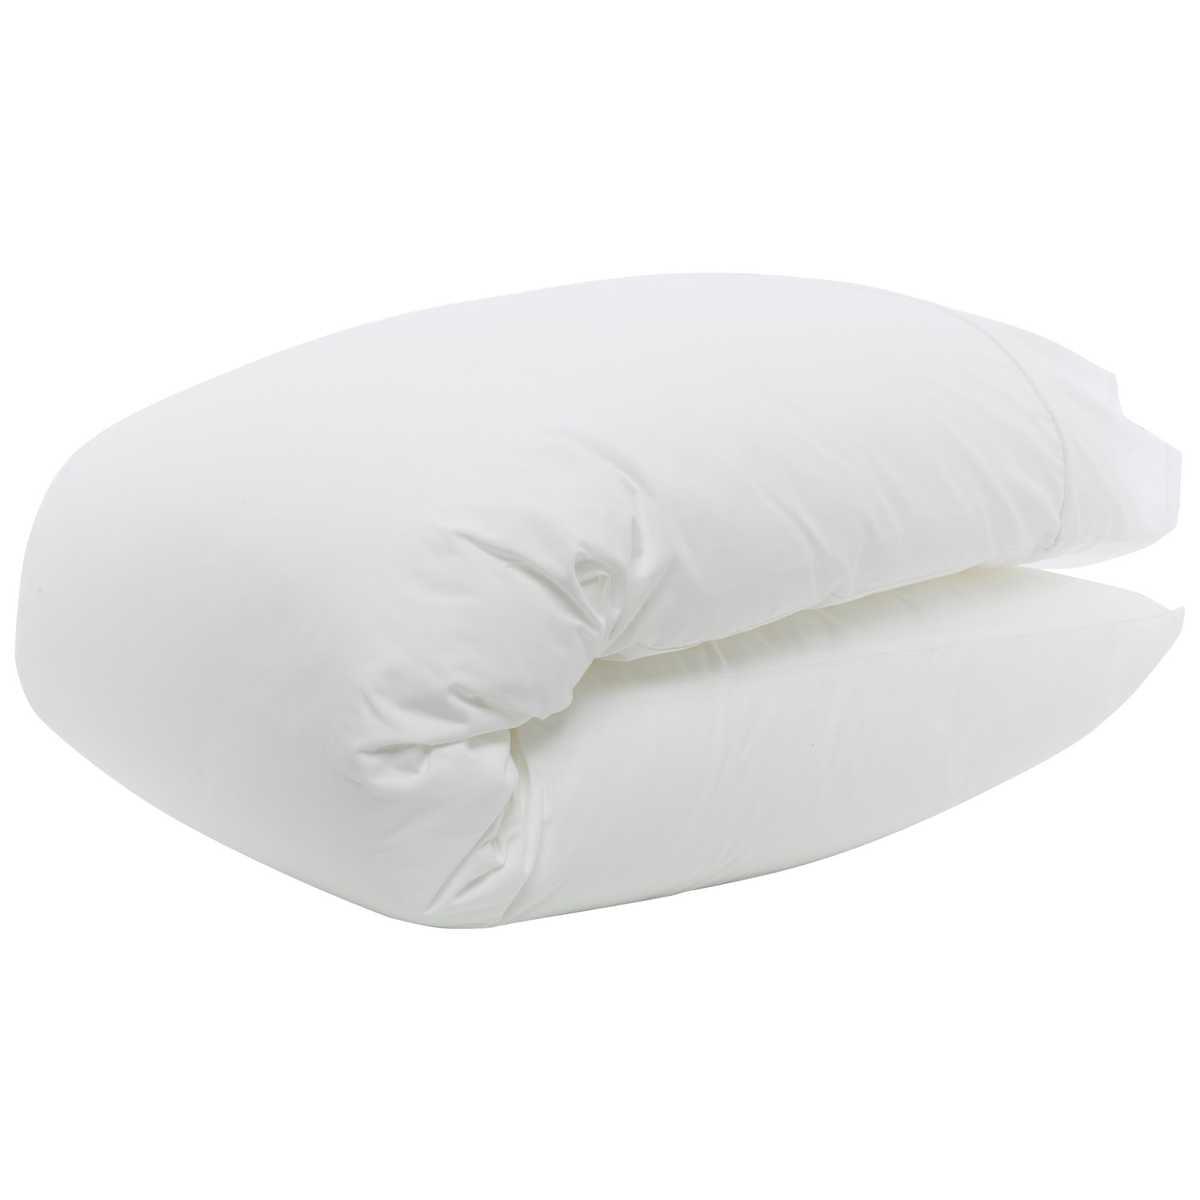 Dreamaker Body and Maternity Pillow Deals499